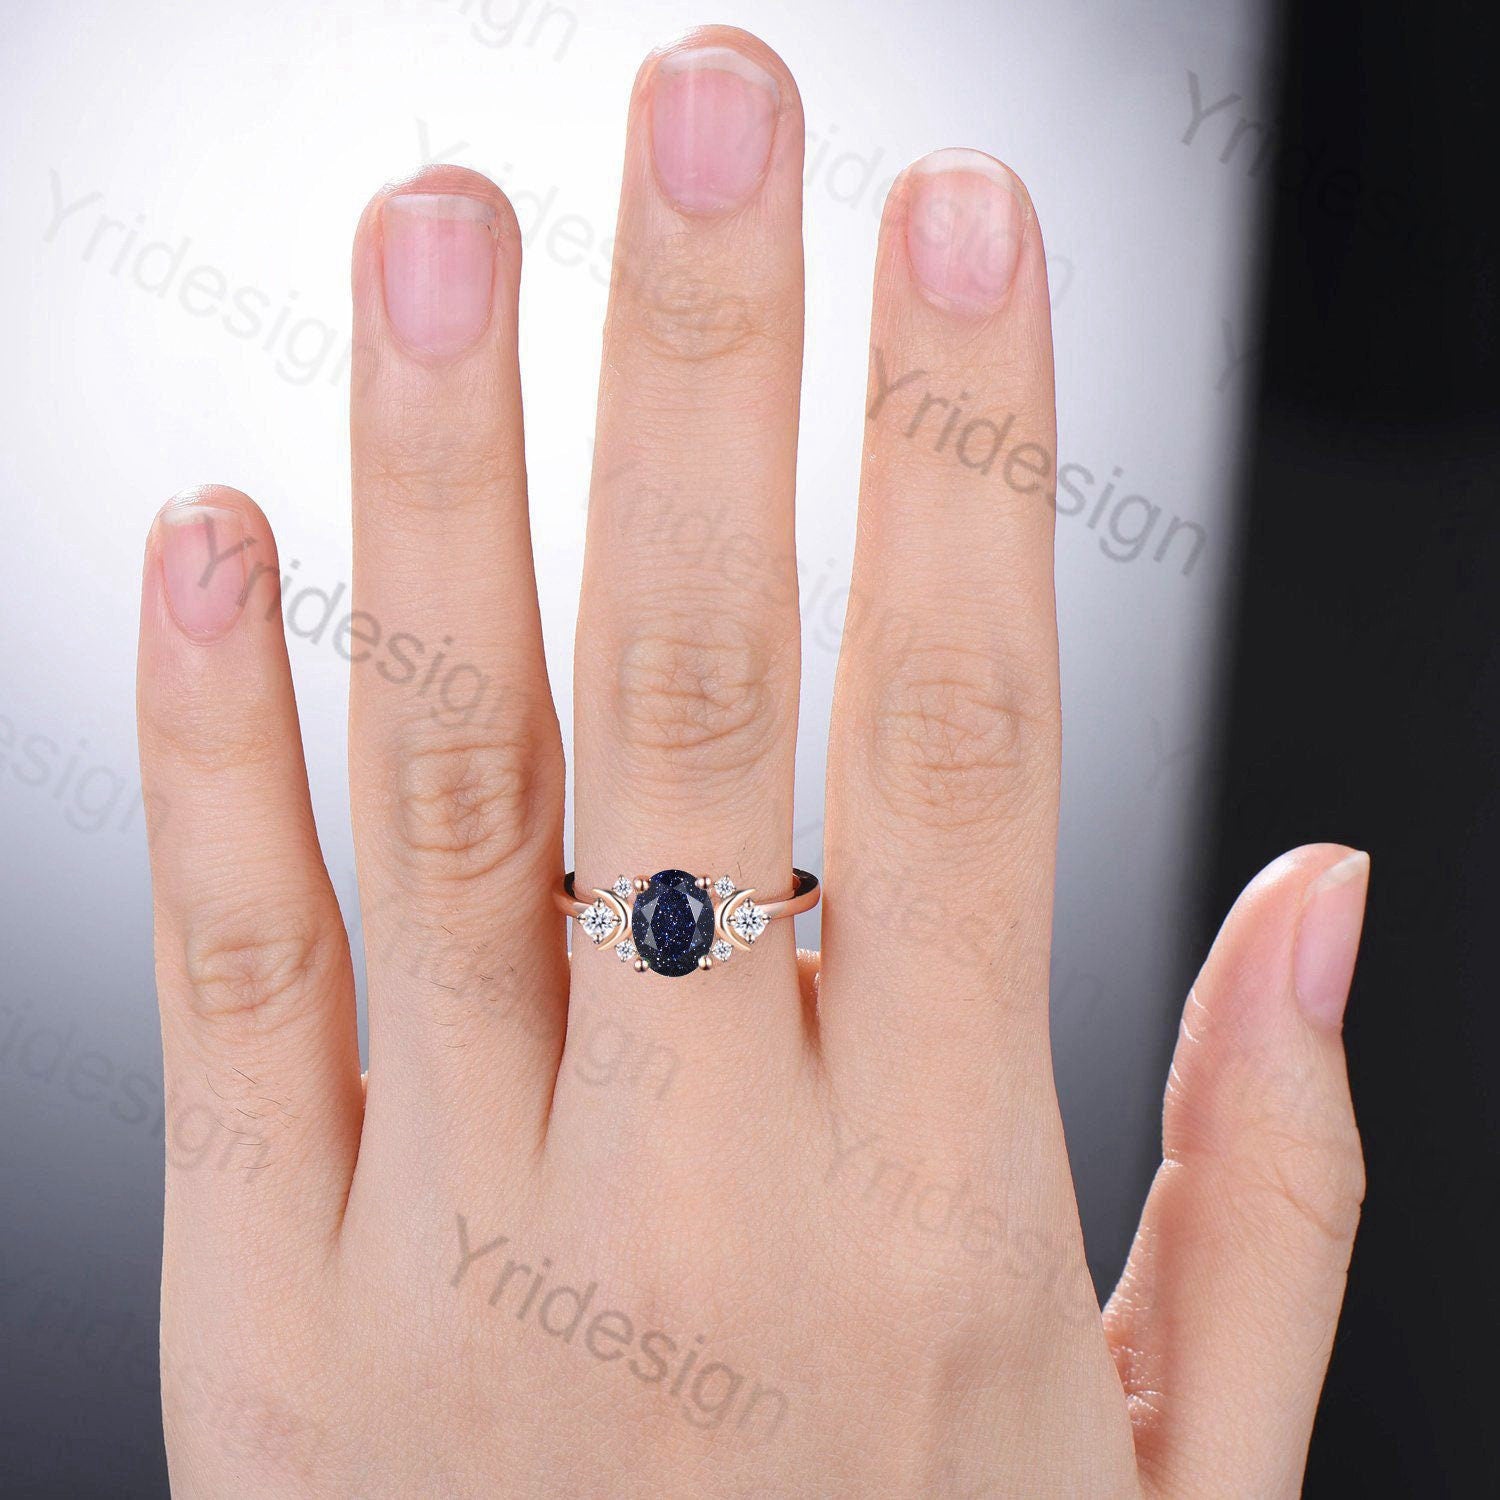 Vintage Moon Blue Sandstone Ring Unique 1.5Ct Oval Galaxy Engagement Ring Wedding Ring For Women Unique Handmade Proposal Gifts for Women - PENFINE